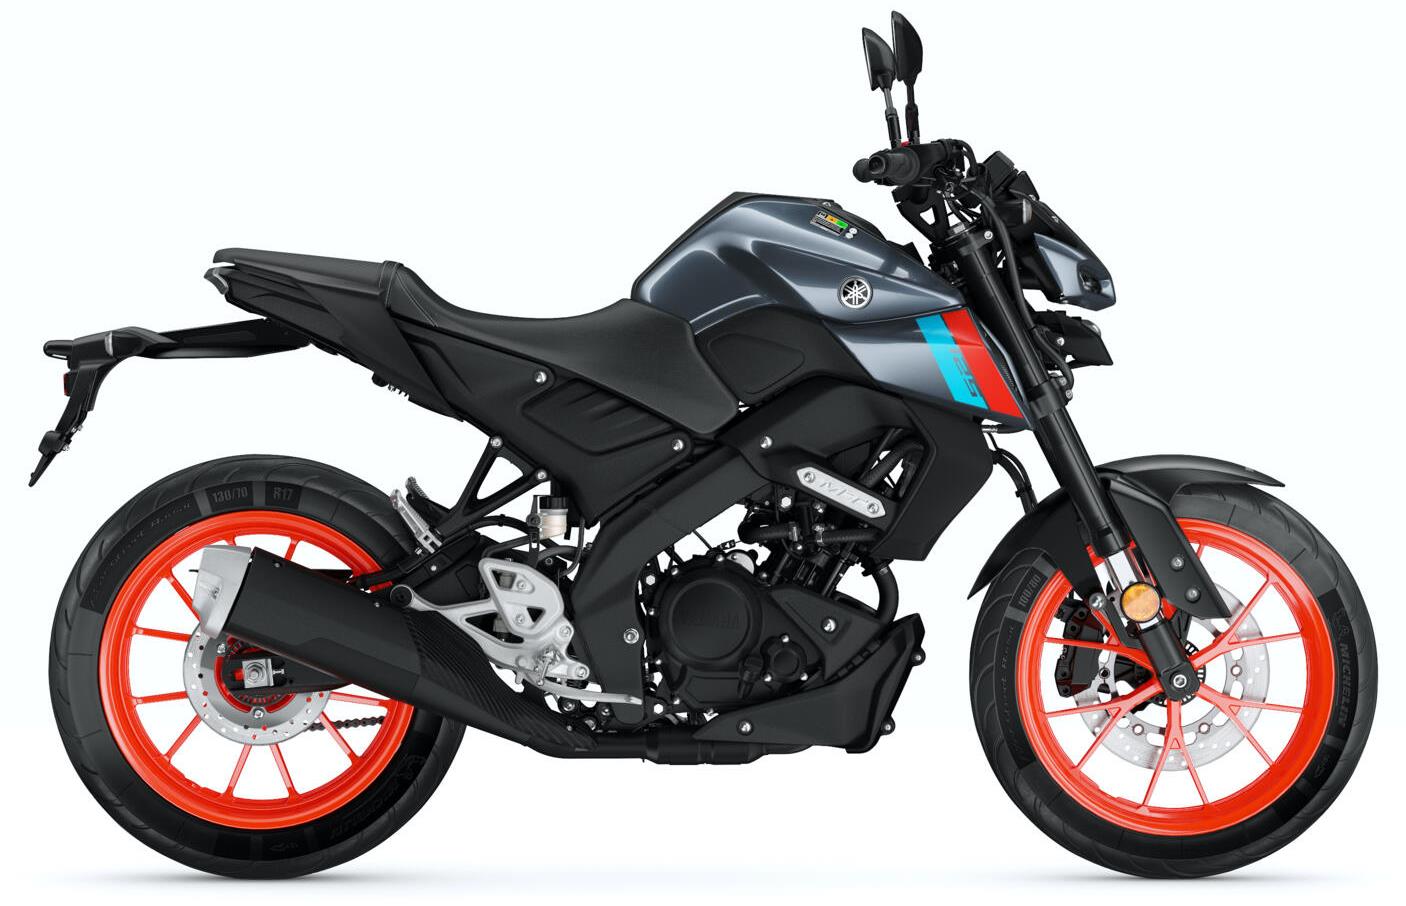 2022 Yamaha MT-125 Specifications and Expected Price in India